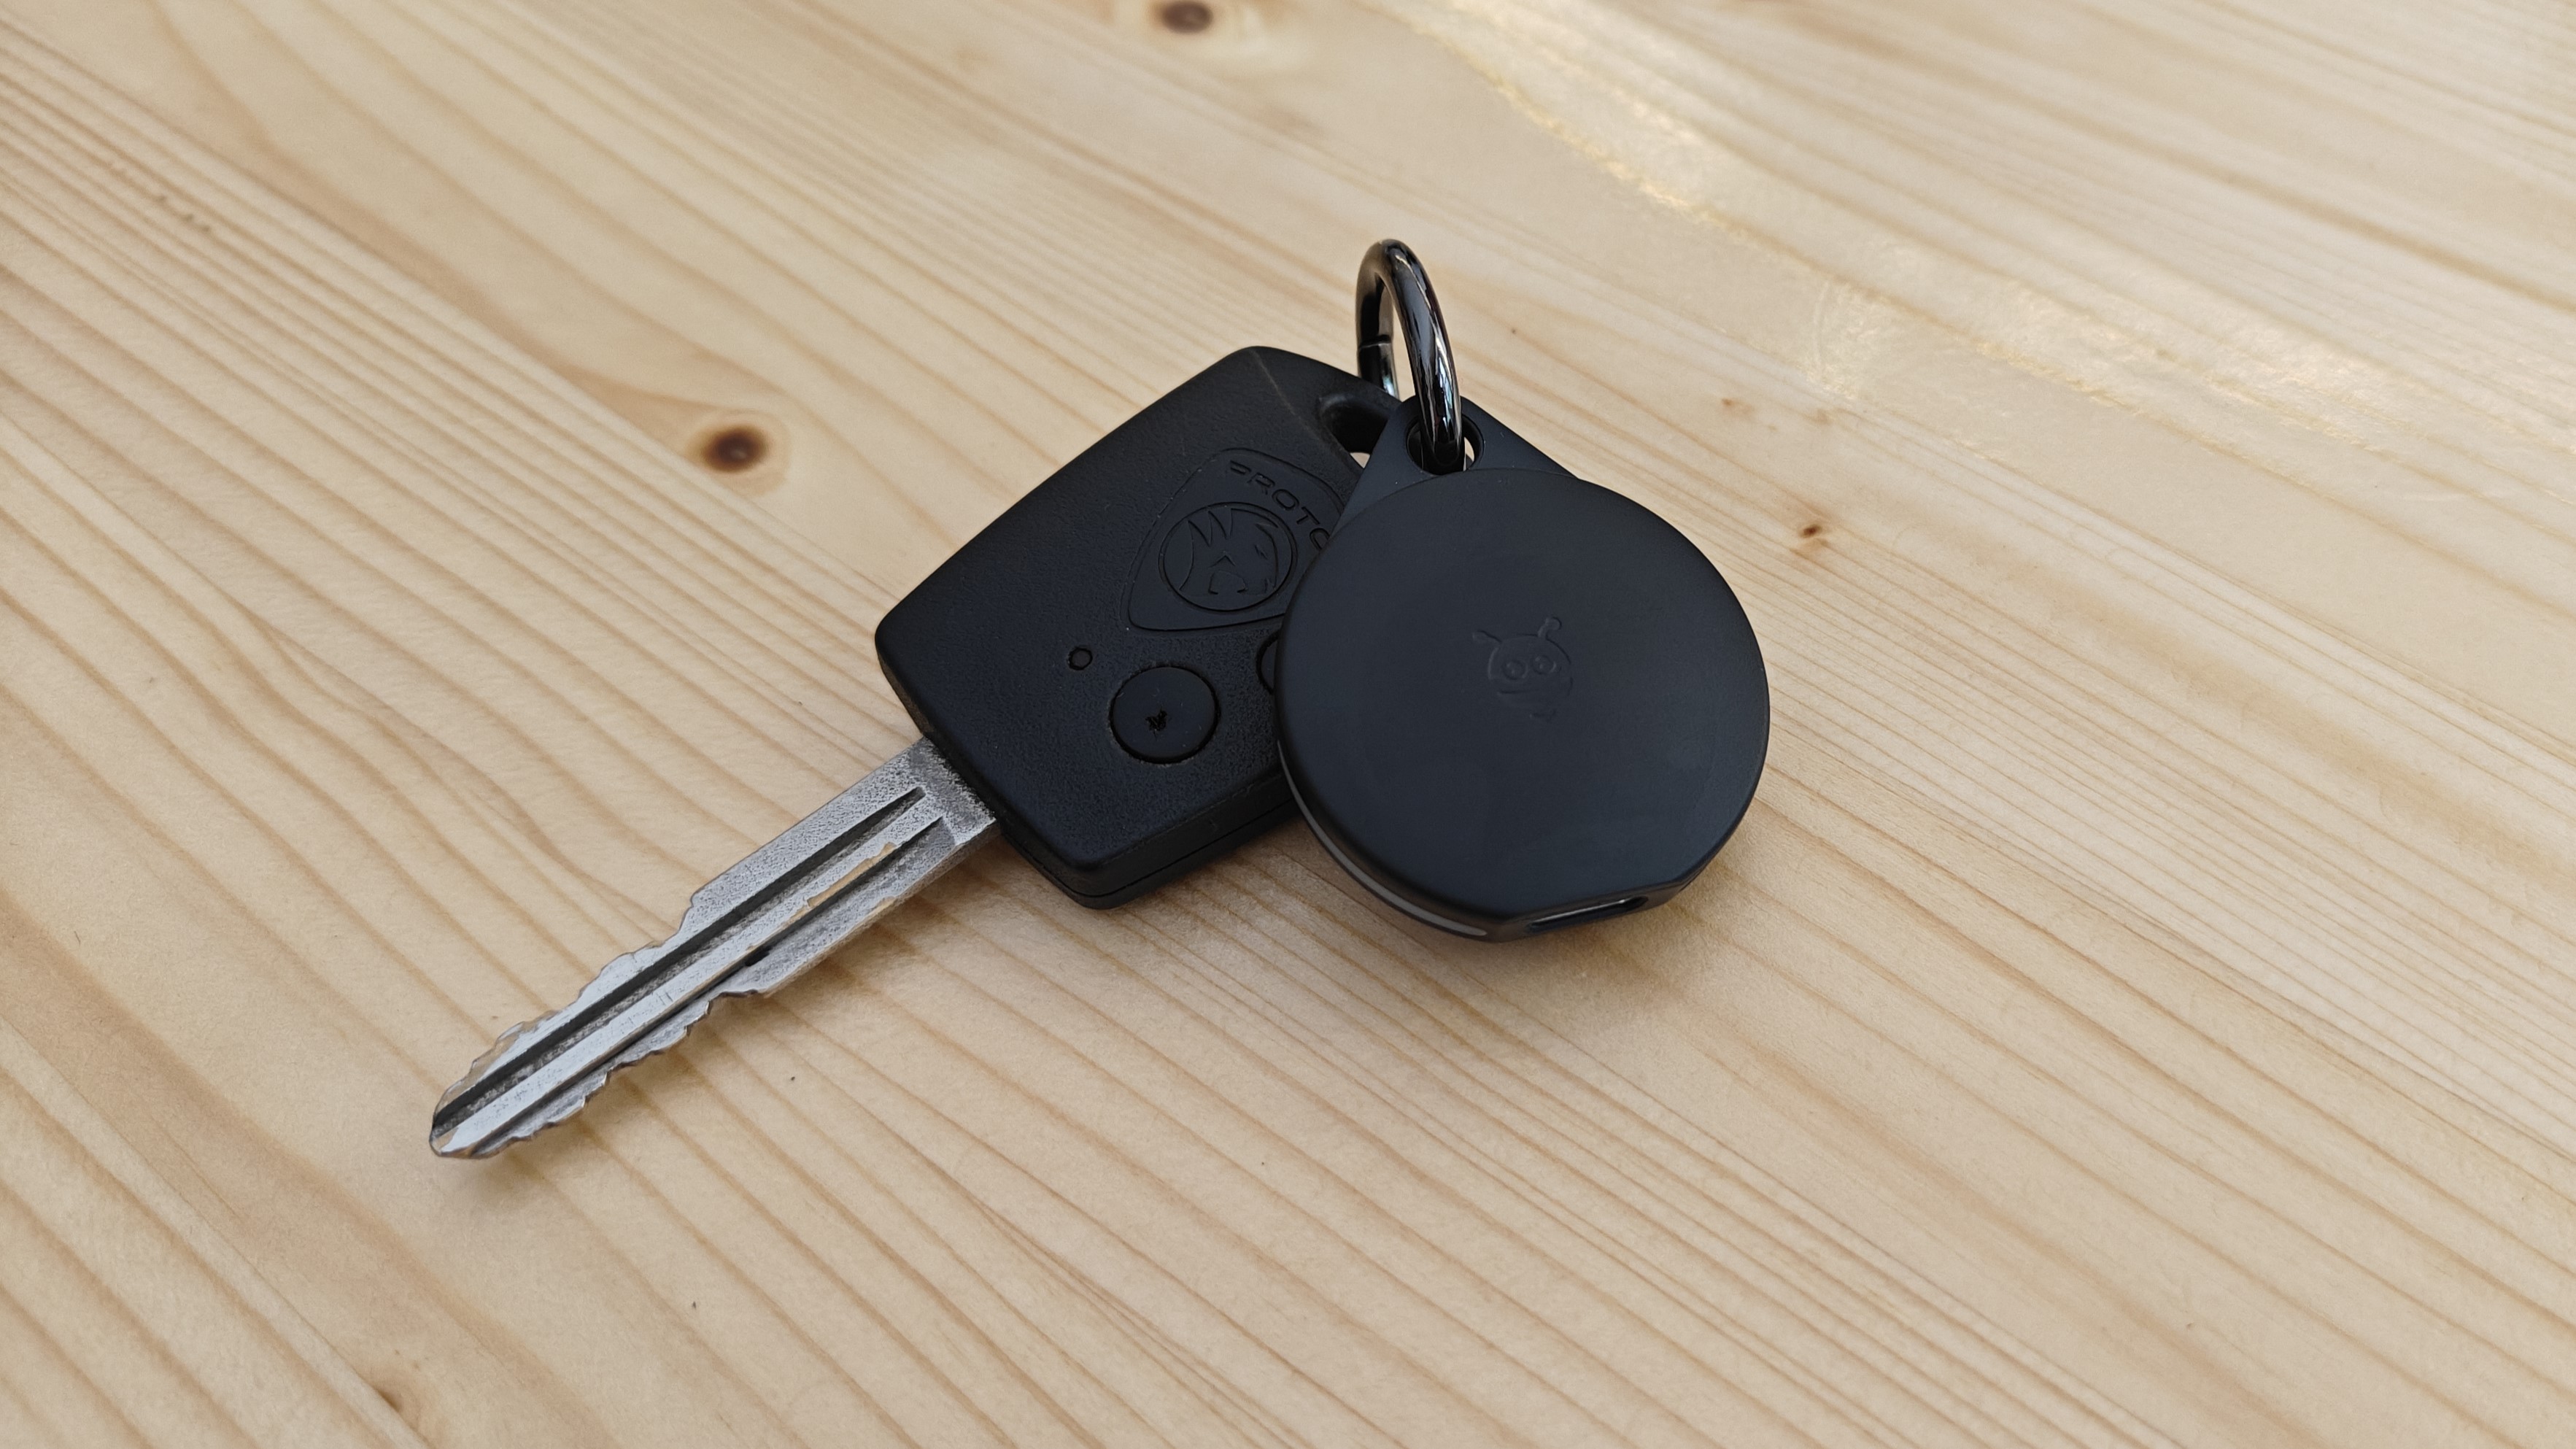 Pebblebee Clip for Android compatible with the Google Find My Device network, attached to a car key.